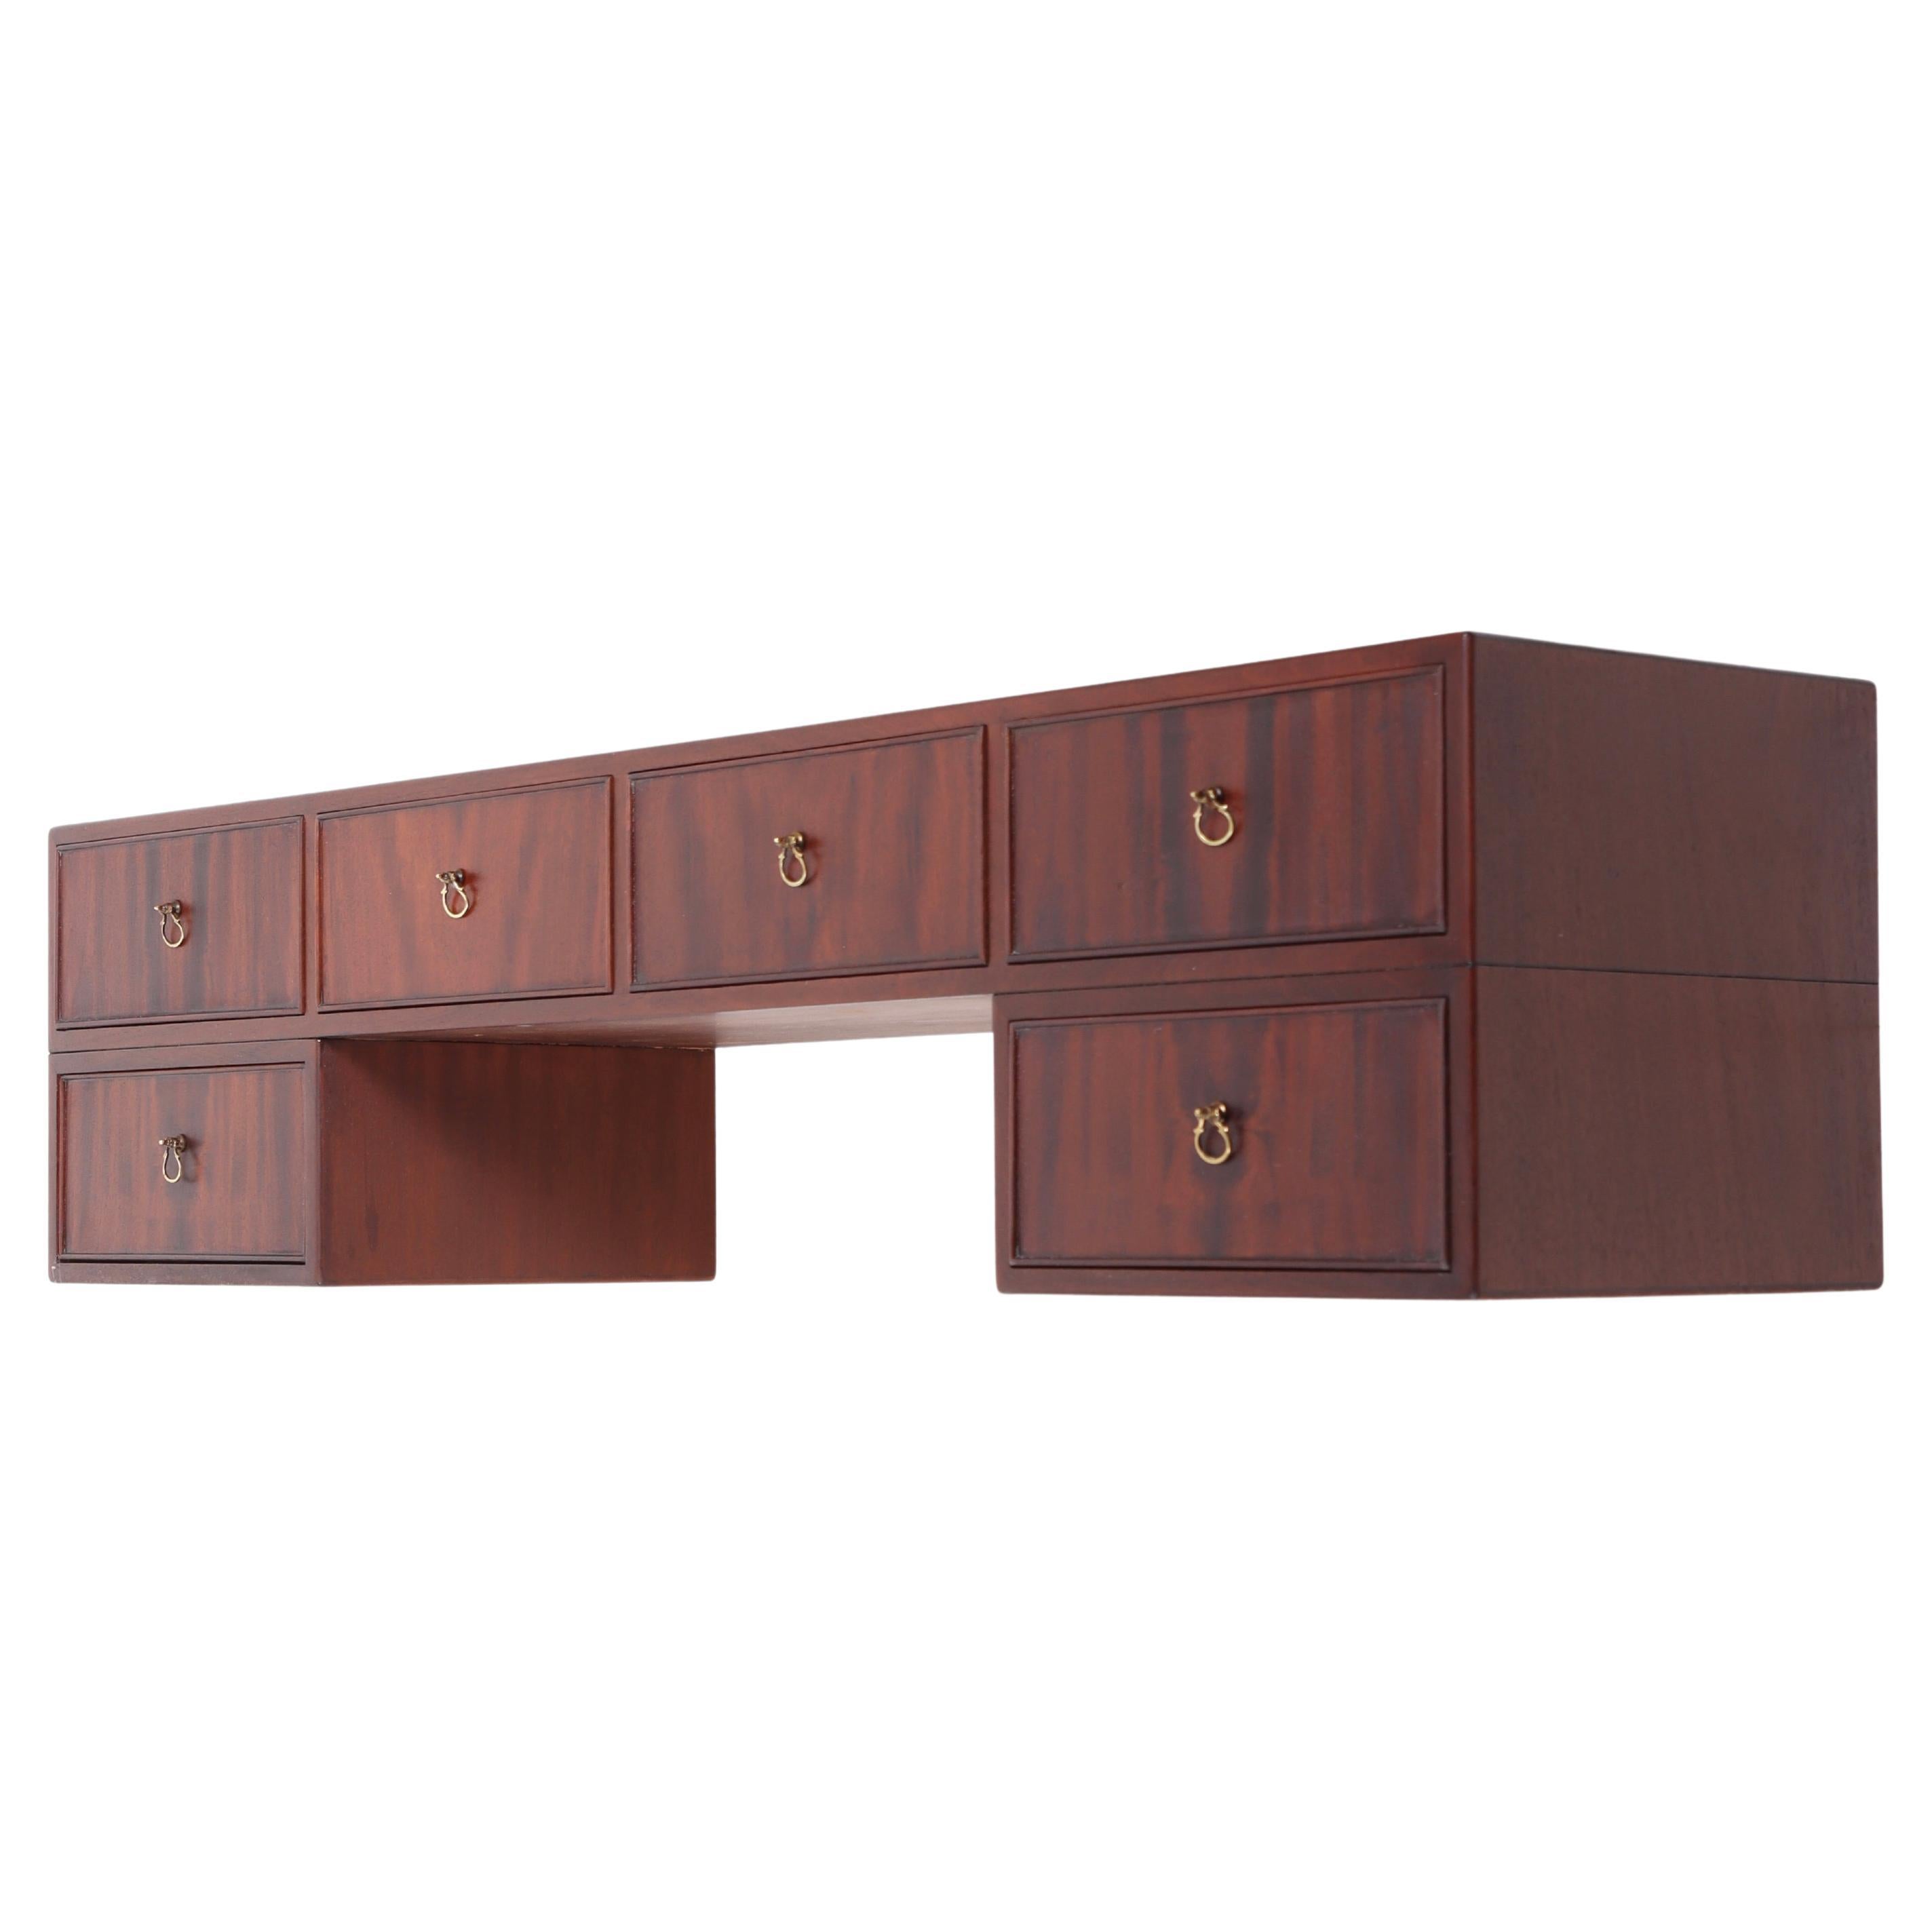 Wall mounted console table in mahogany with drawers, designed and made by cabinetmaker Frits Henningsen. Made in Denmark, great original condition.